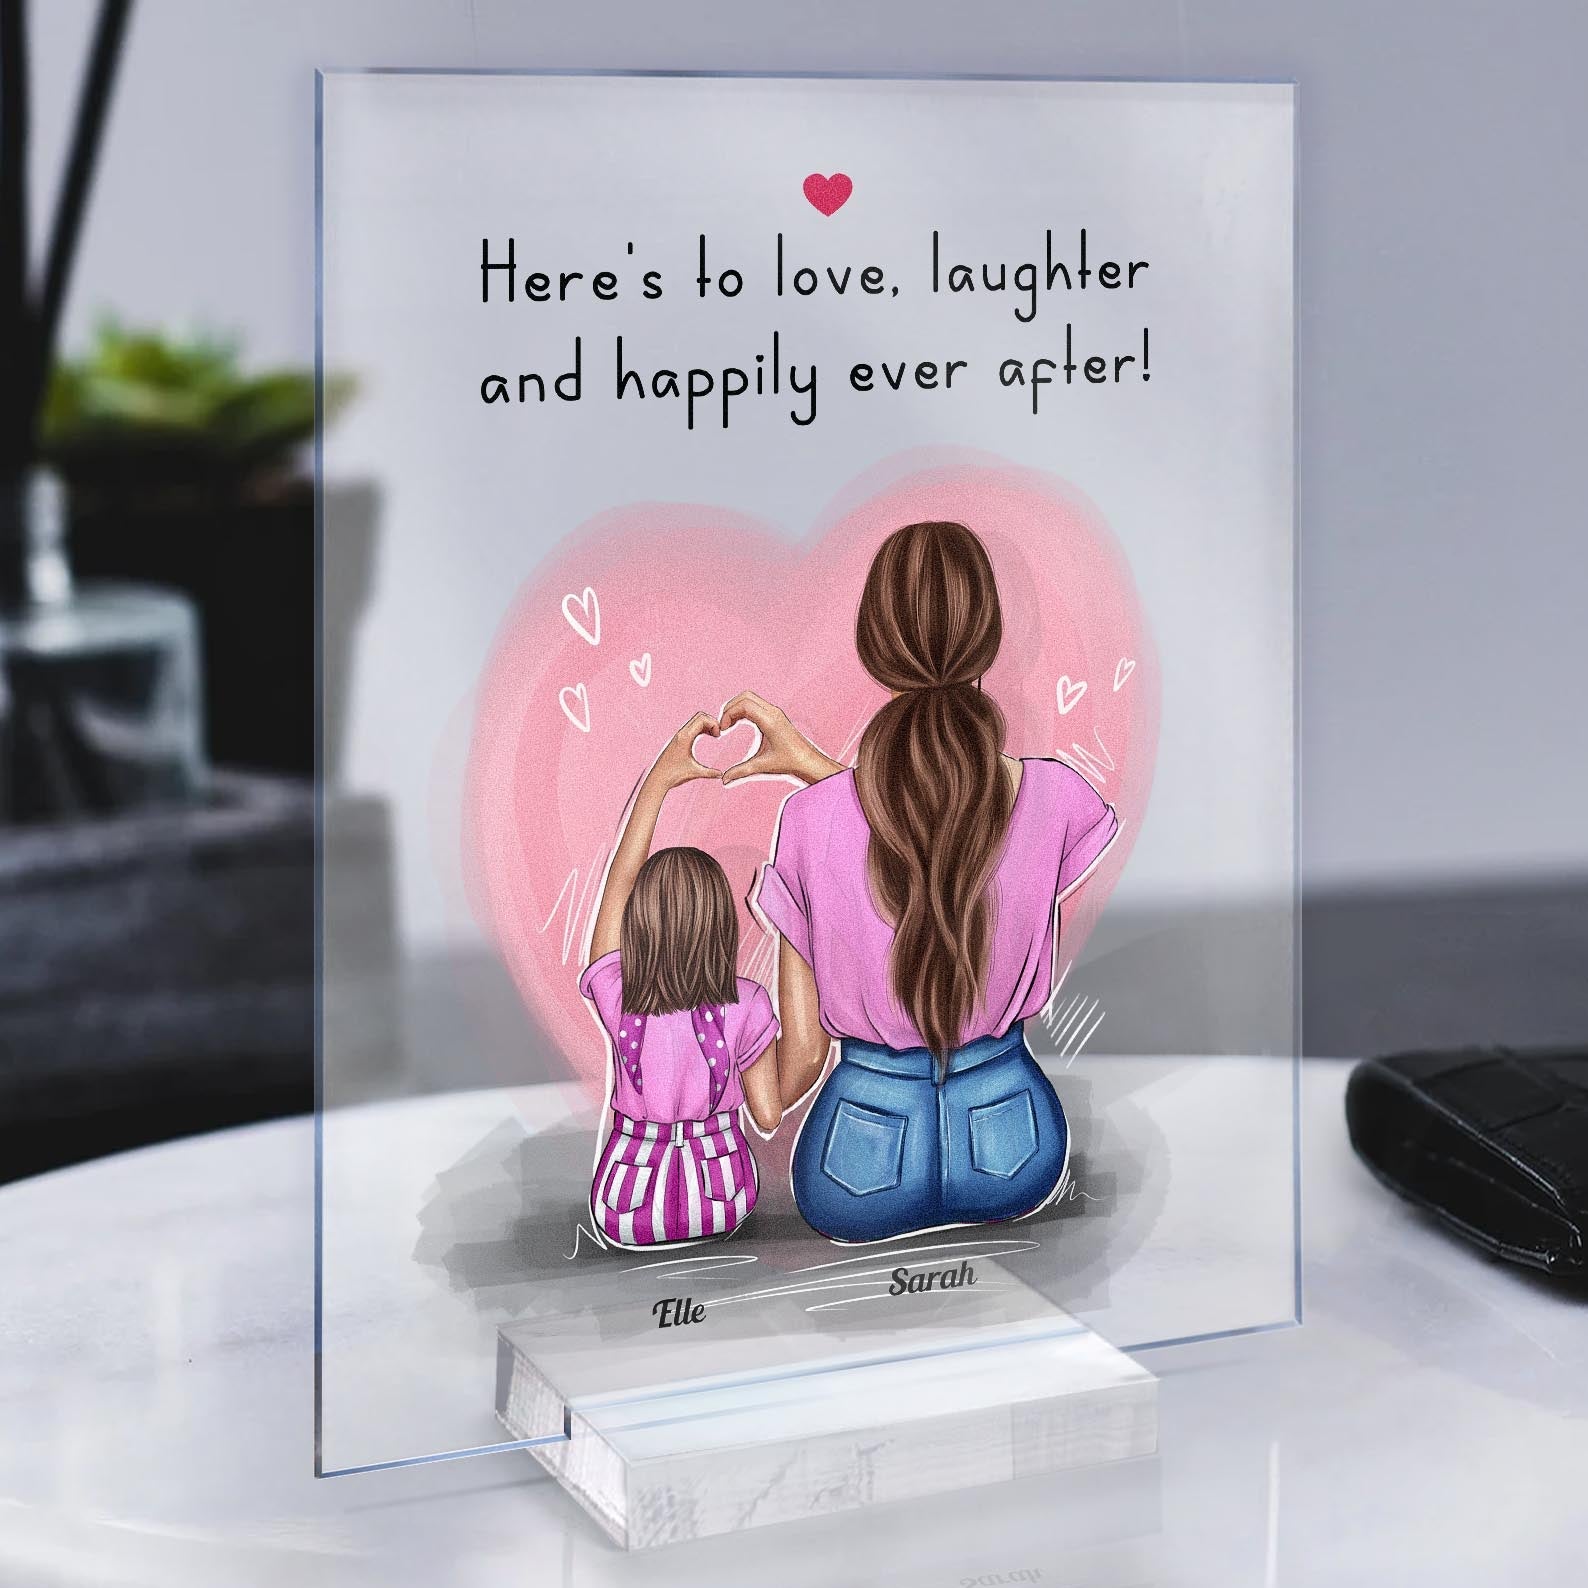 And Suddenly You Were My Everything - Personalized Acrylic Plaque - Birthday Gift Mother's Day Gift For Mom, Wife -  Gift From Husband